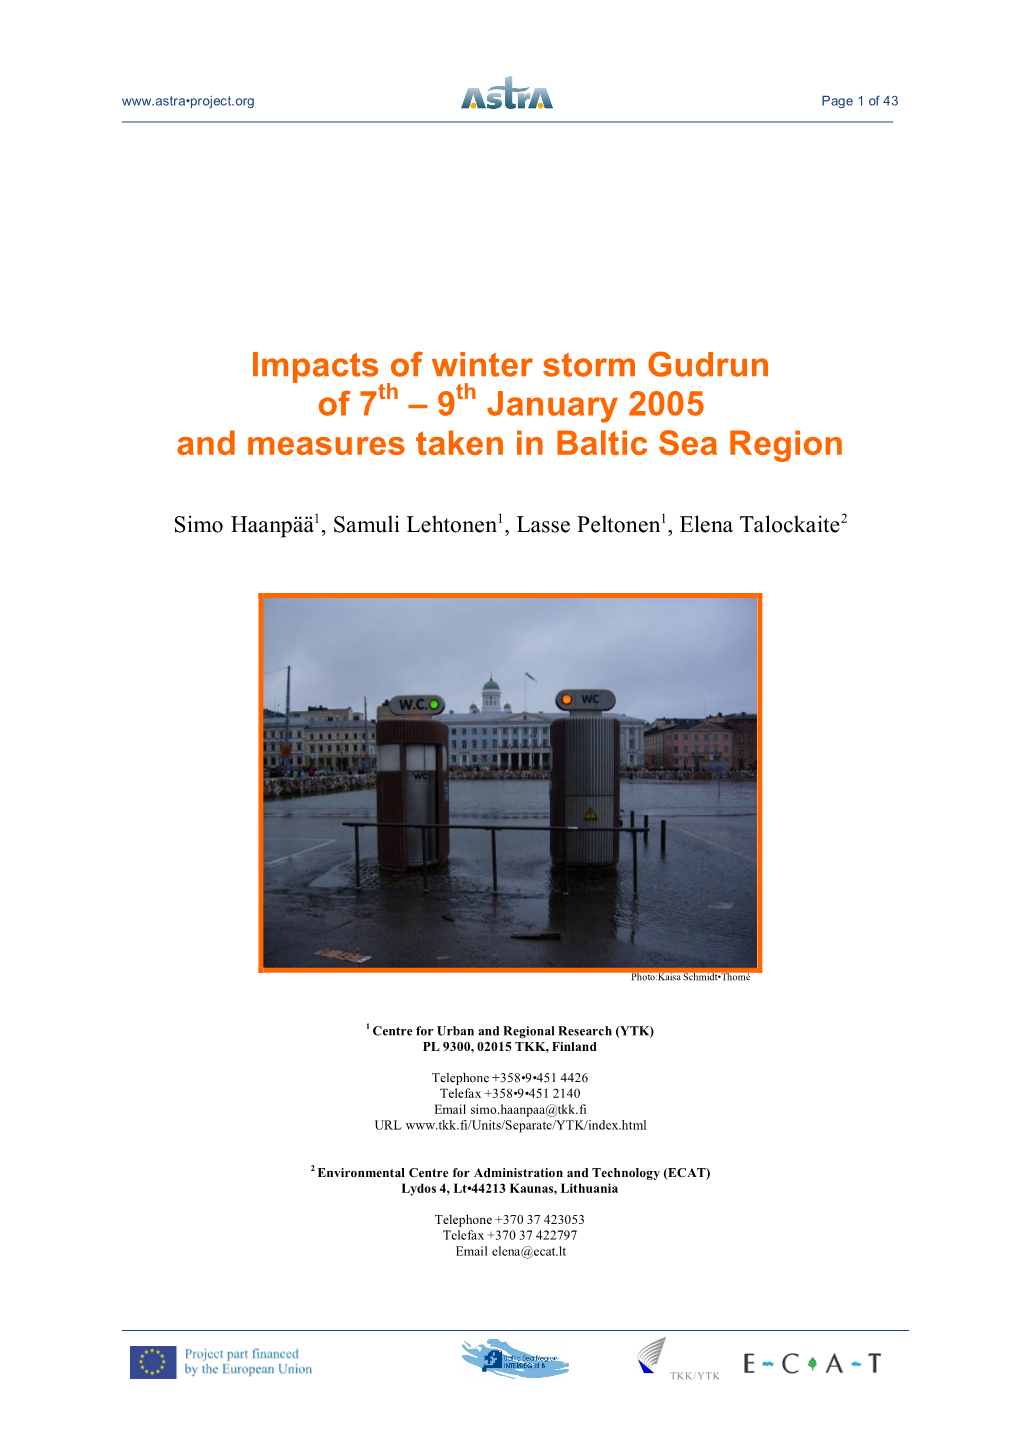 Impacts of Winter Storm Gudrun of 7Th – 9Th January 2005 and Measures Taken in Baltic Sea Region